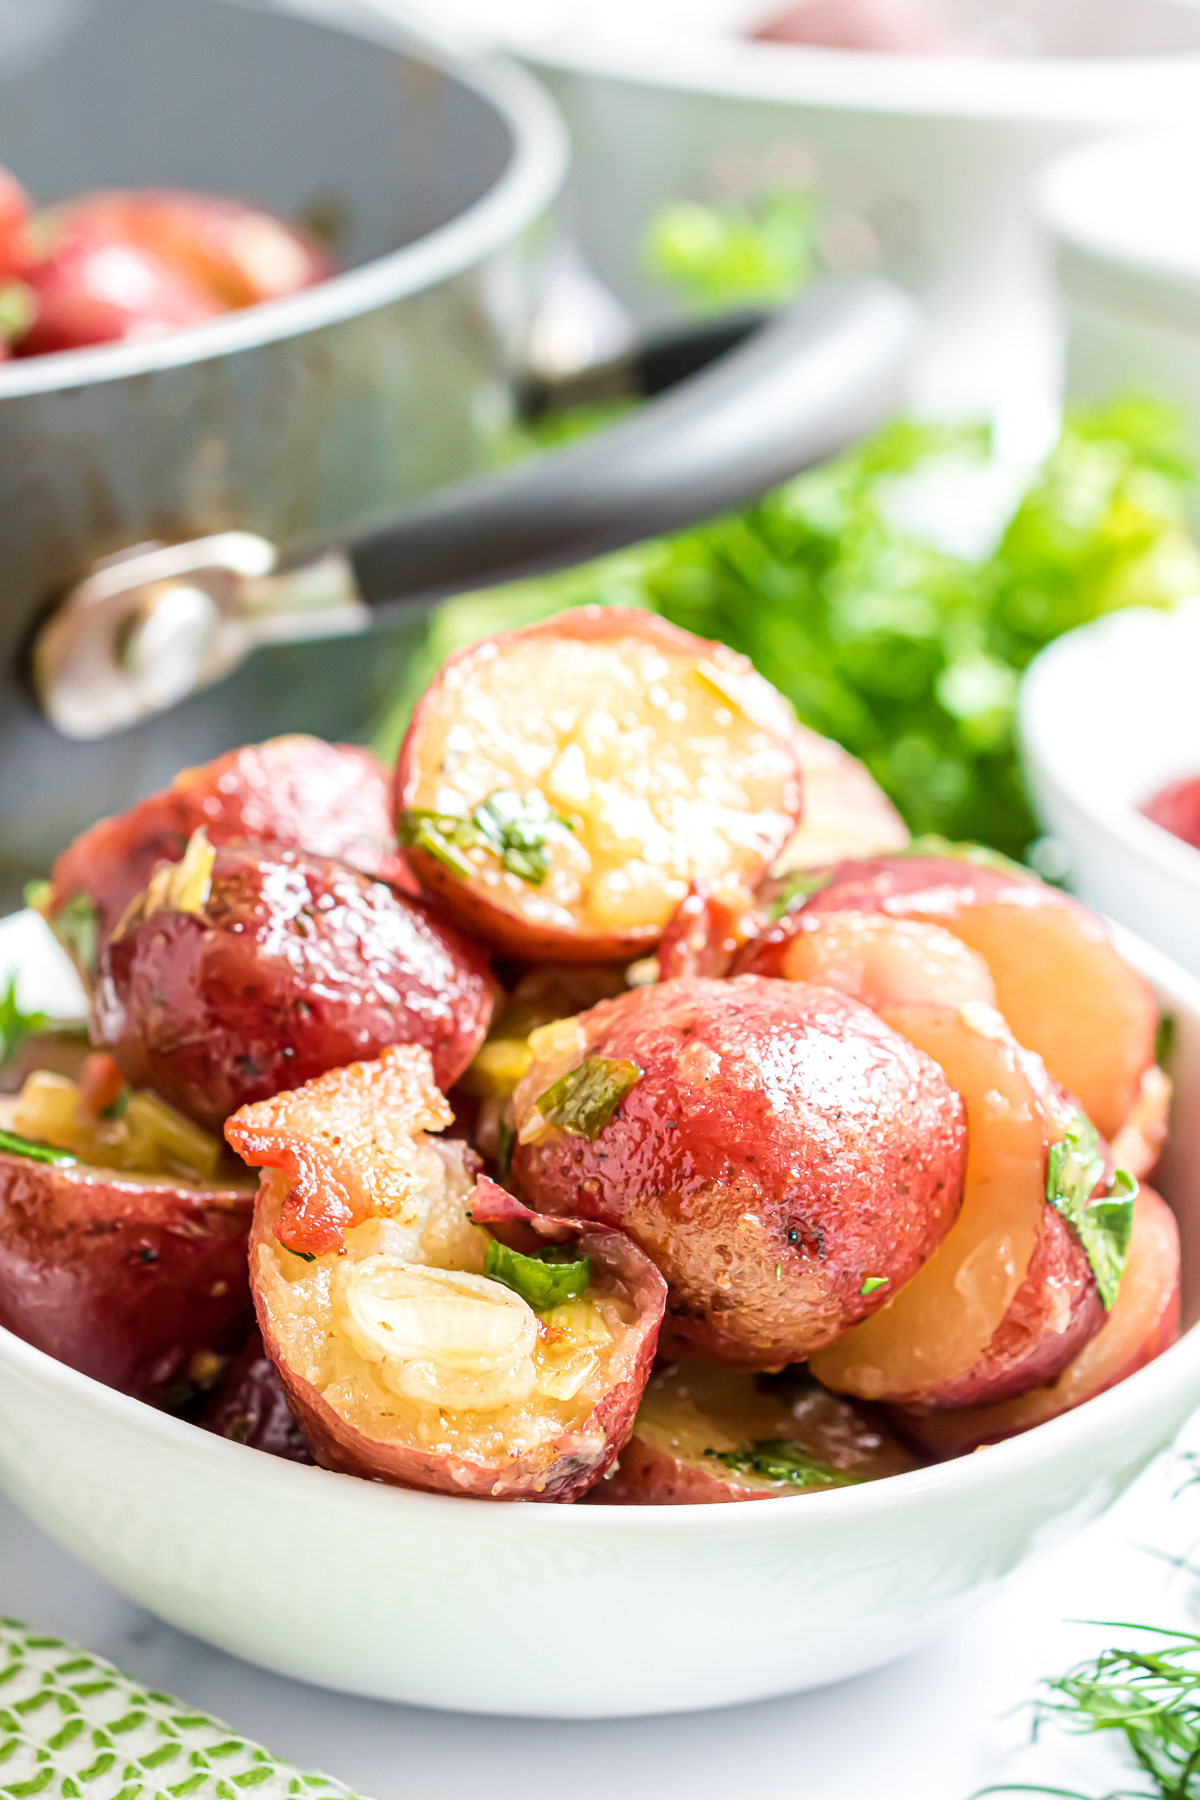 A heaping serving of the warm potato salad in a bowl.